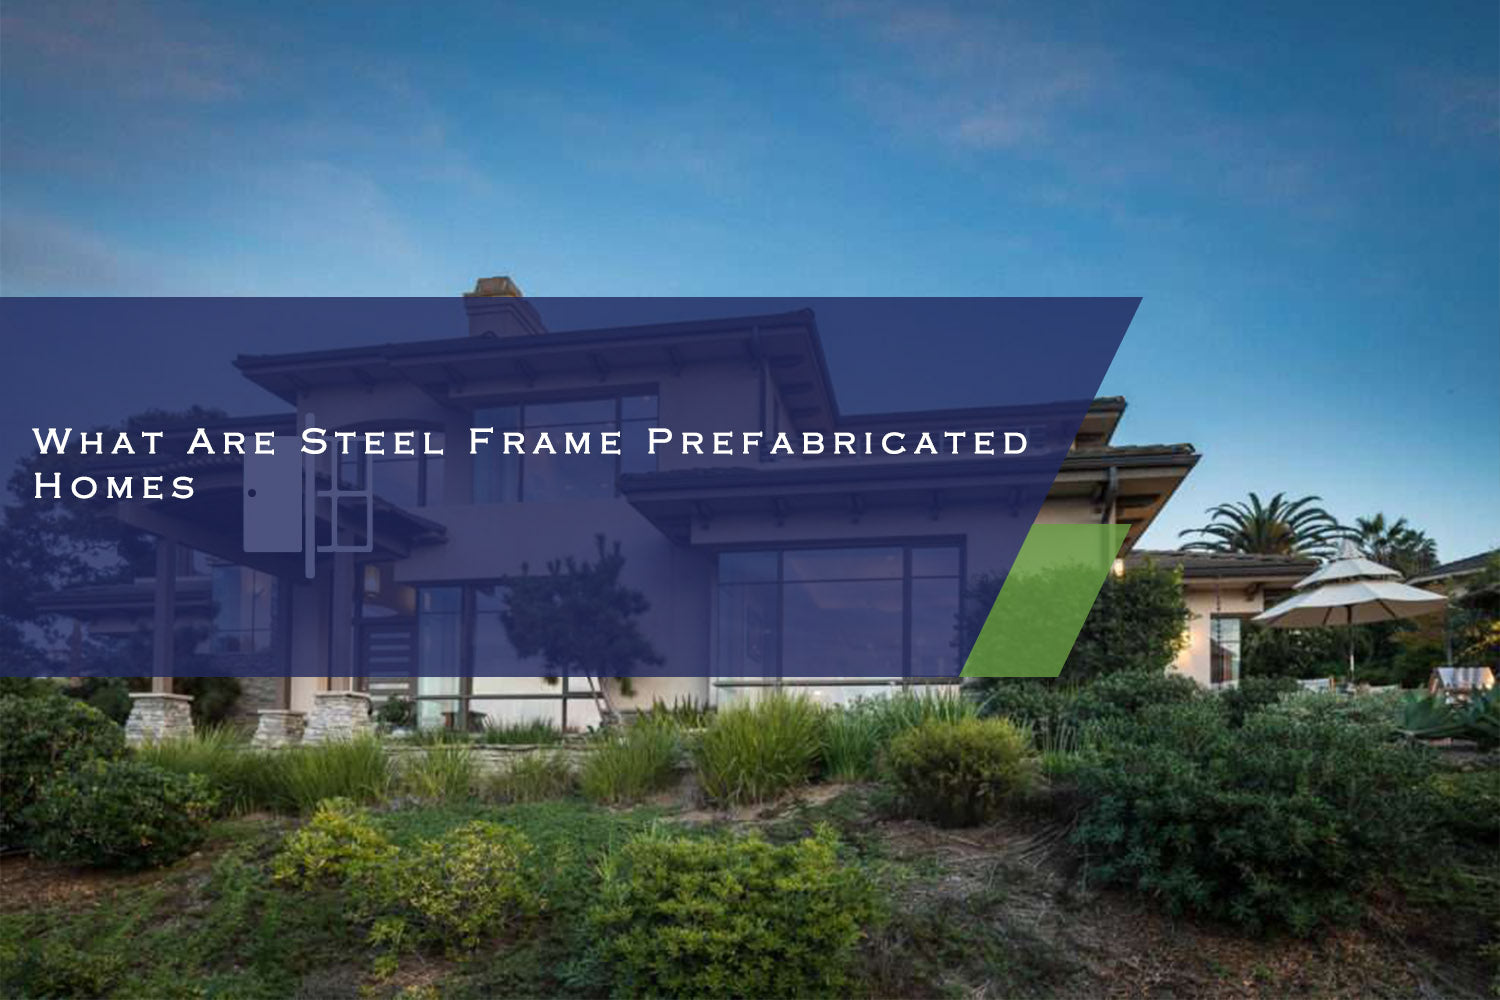 What Are Steel Frame Prefabricated Homes?